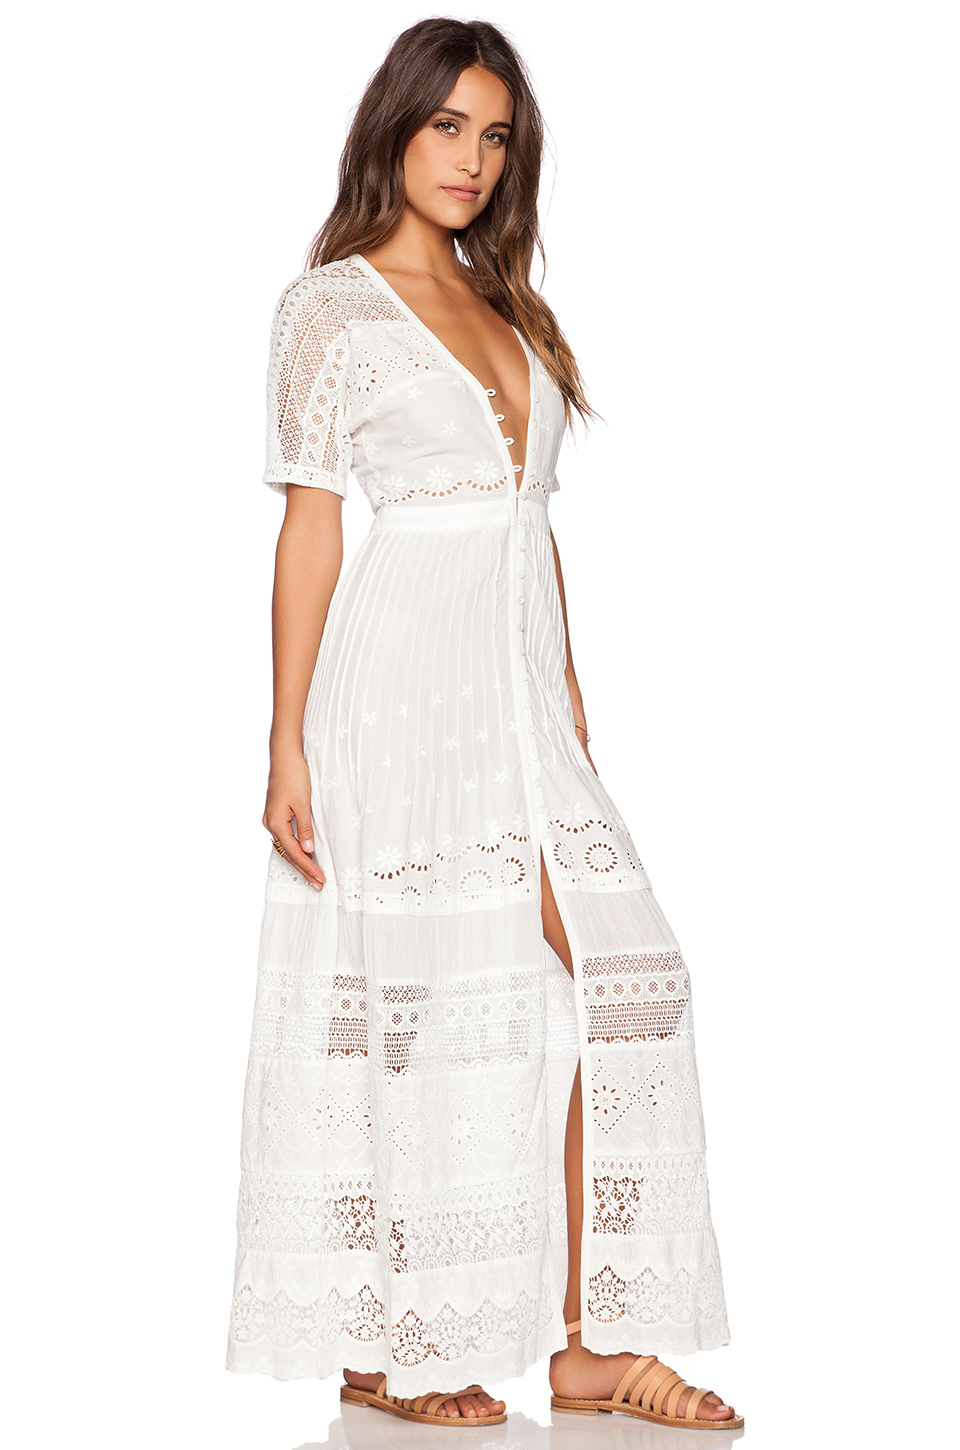 Spell & the gypsy collective Sahara Lace Duster in White | Lyst